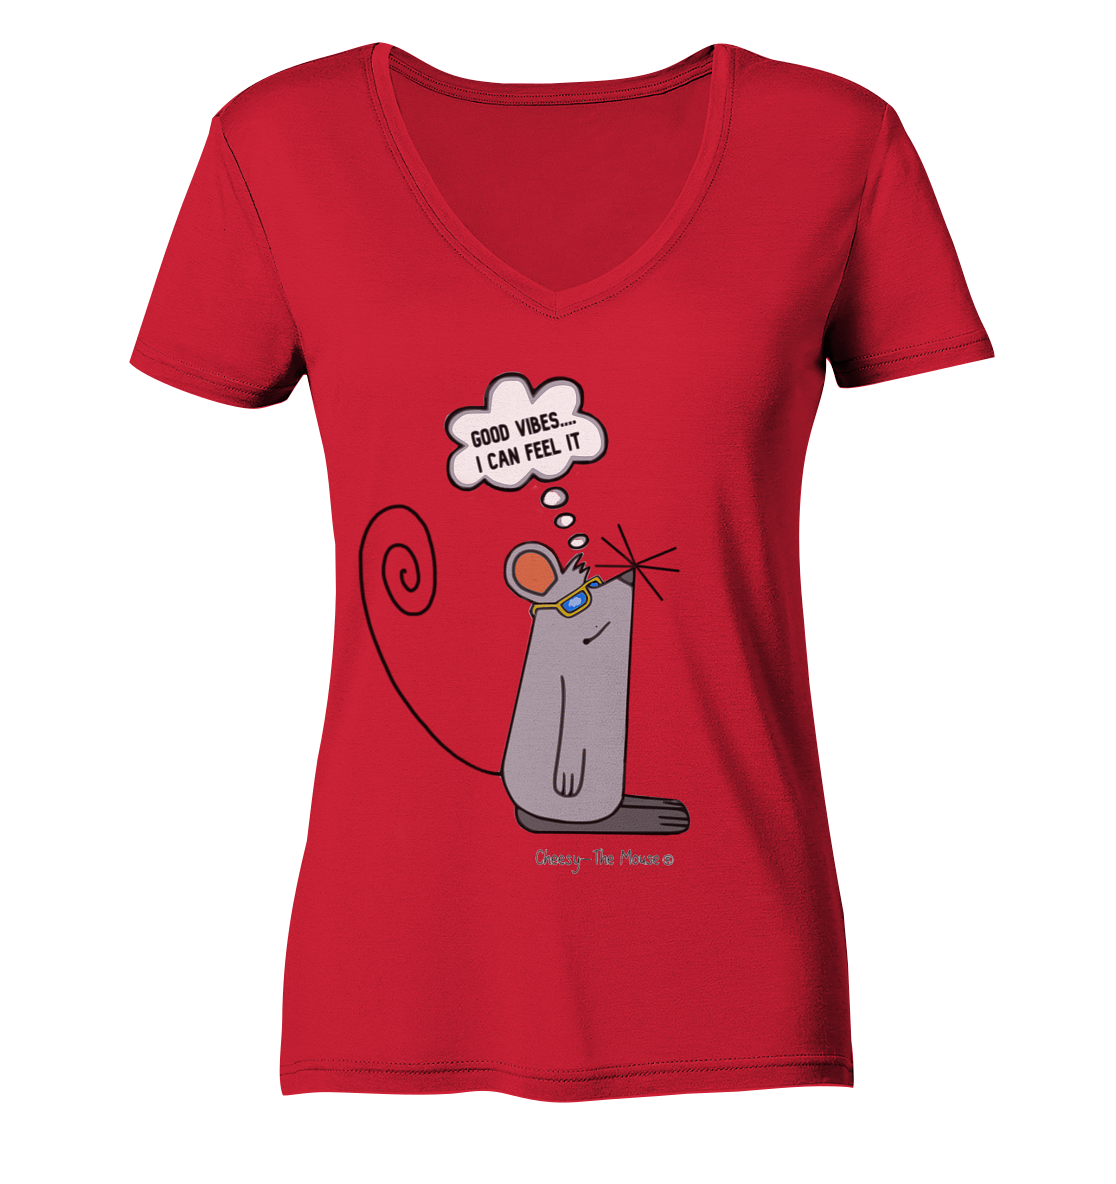 Cheesy -The Mouse Good Vibes - Ladies Organic V-Neck Shirt